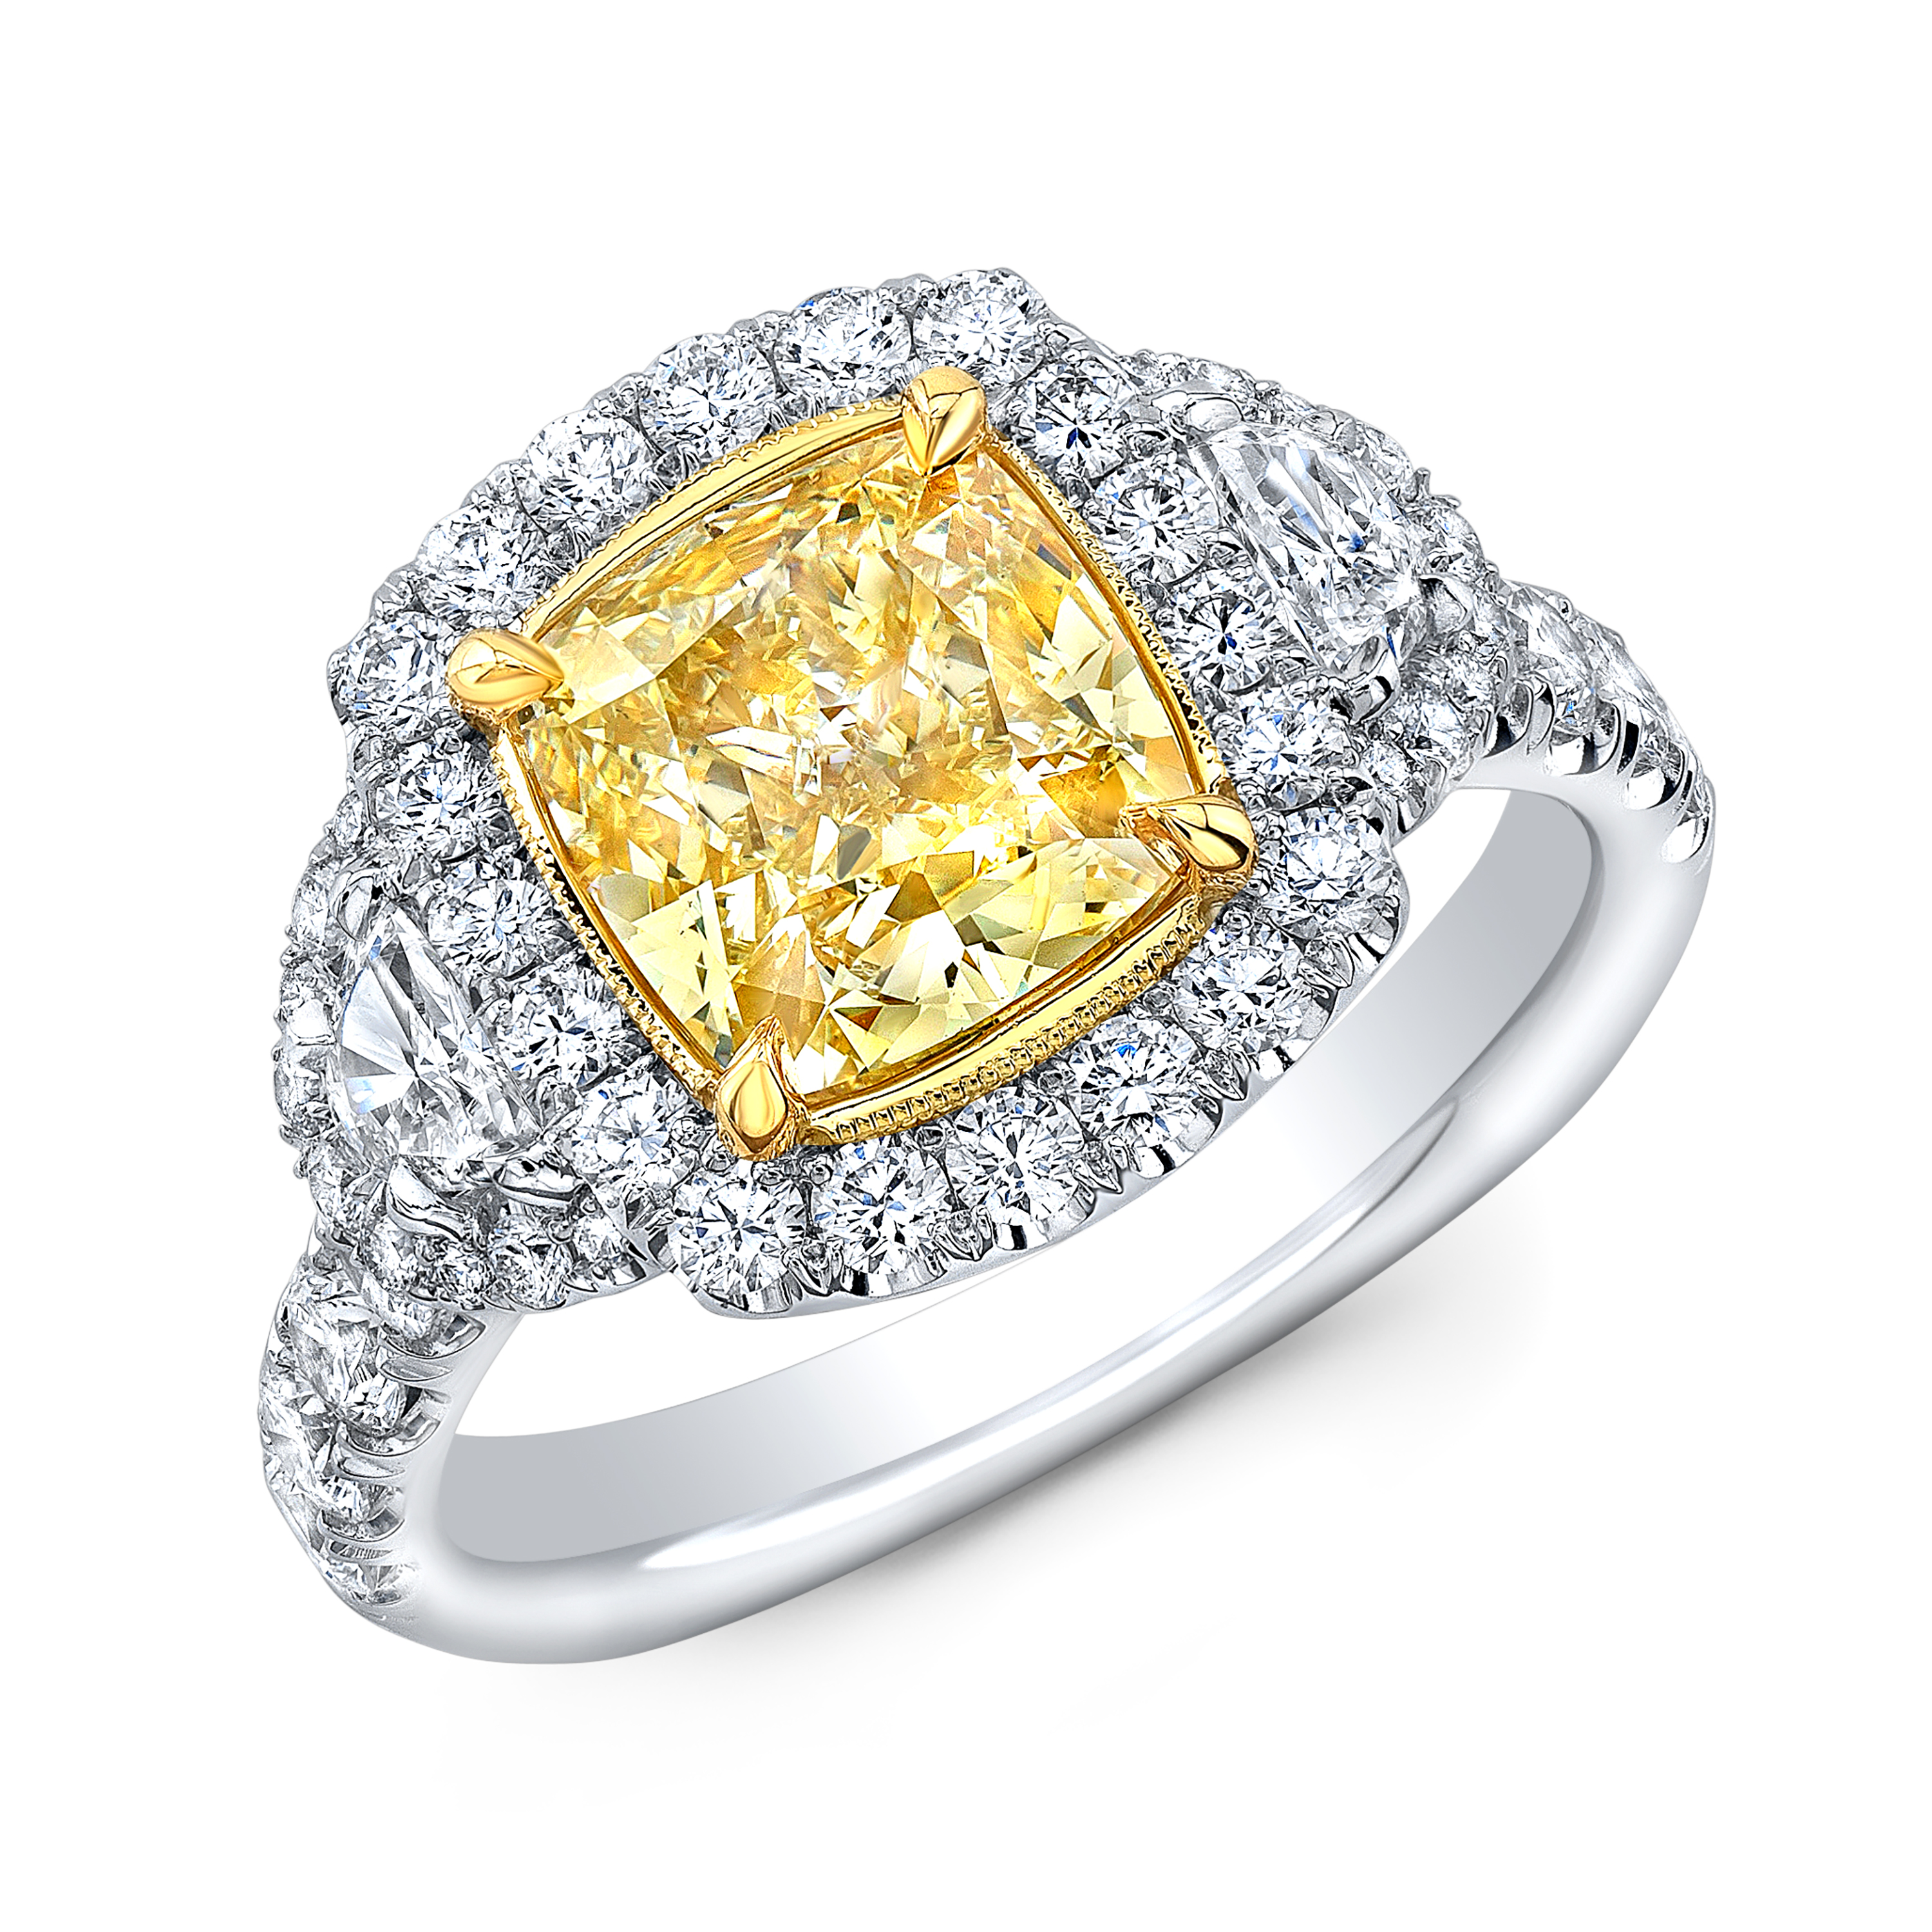 Canary Diamond: Everything You Need to Know - Clean Origin Blog